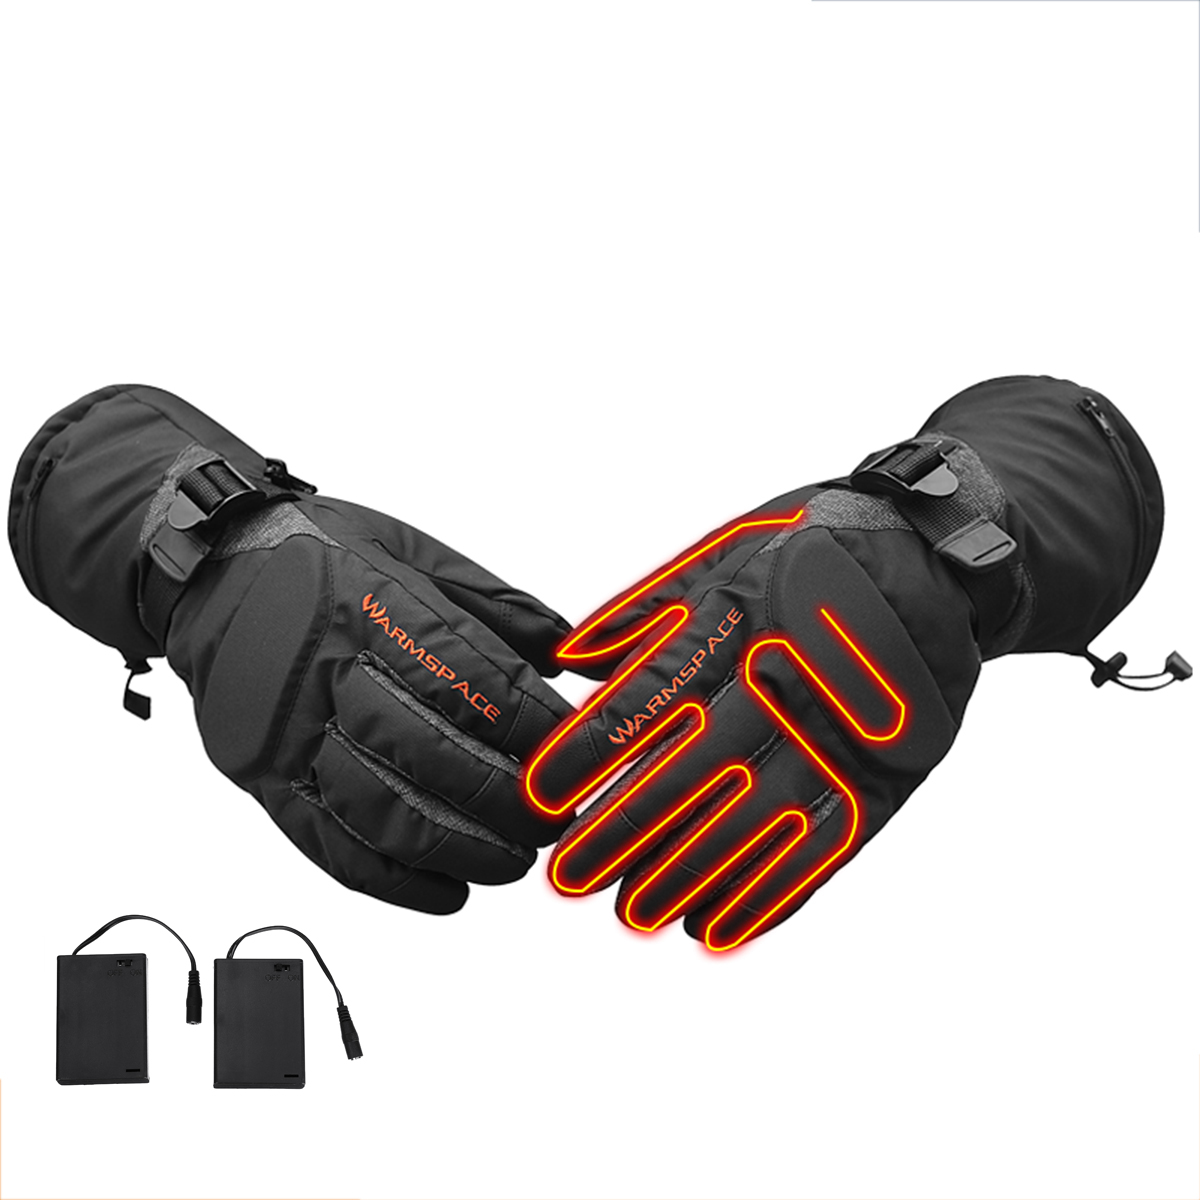 

WARMSPACE Electric Heating Gloves Skiing Motorcycle Heated Gloves Winter Hand Warmer 3 Gear Temperature Adjustment